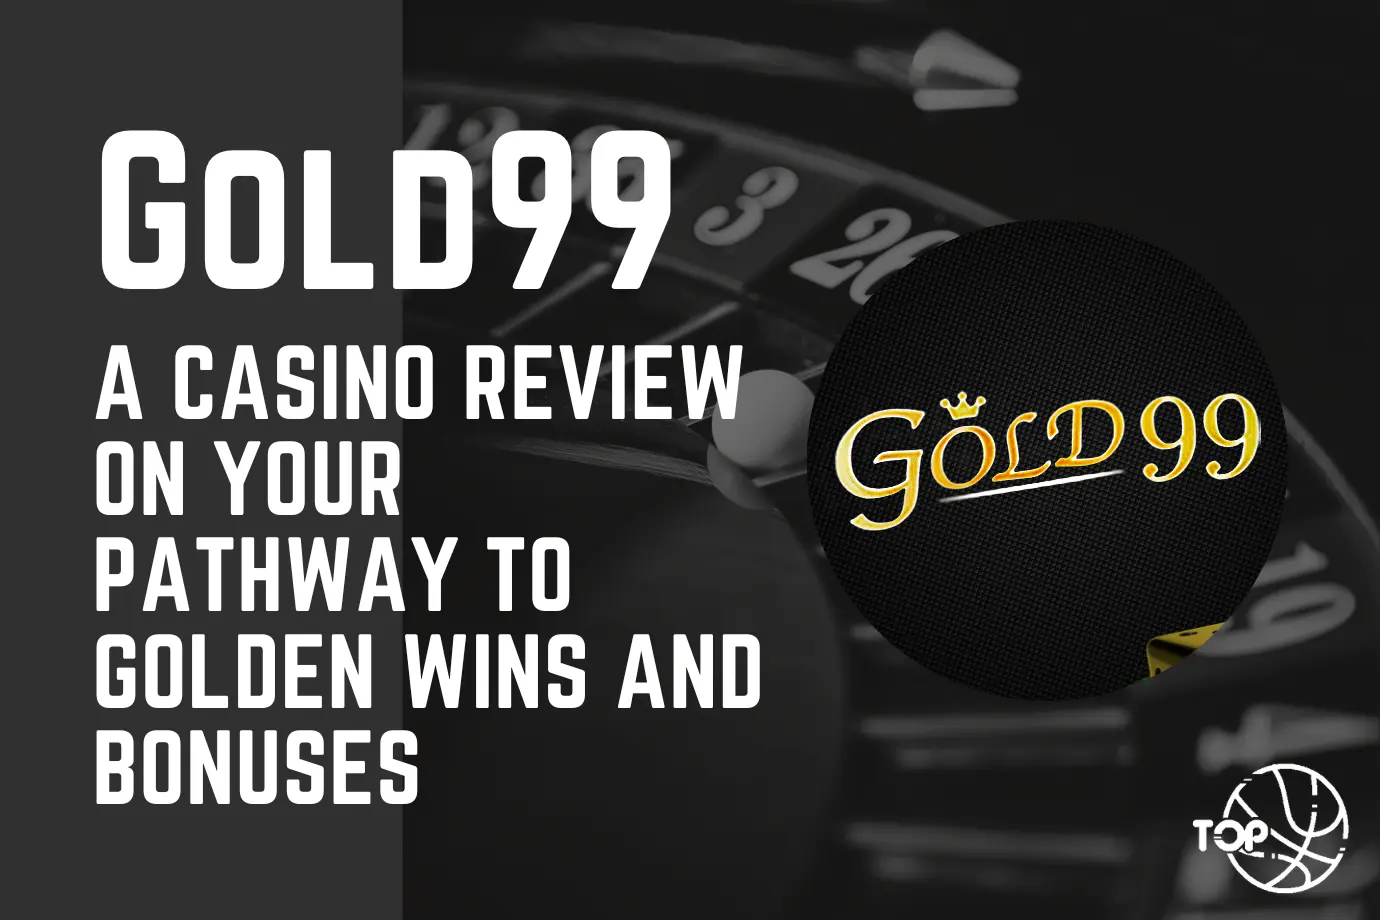 Gold99: A Casino Review in your Pathway to Golden Wins and Bonuses